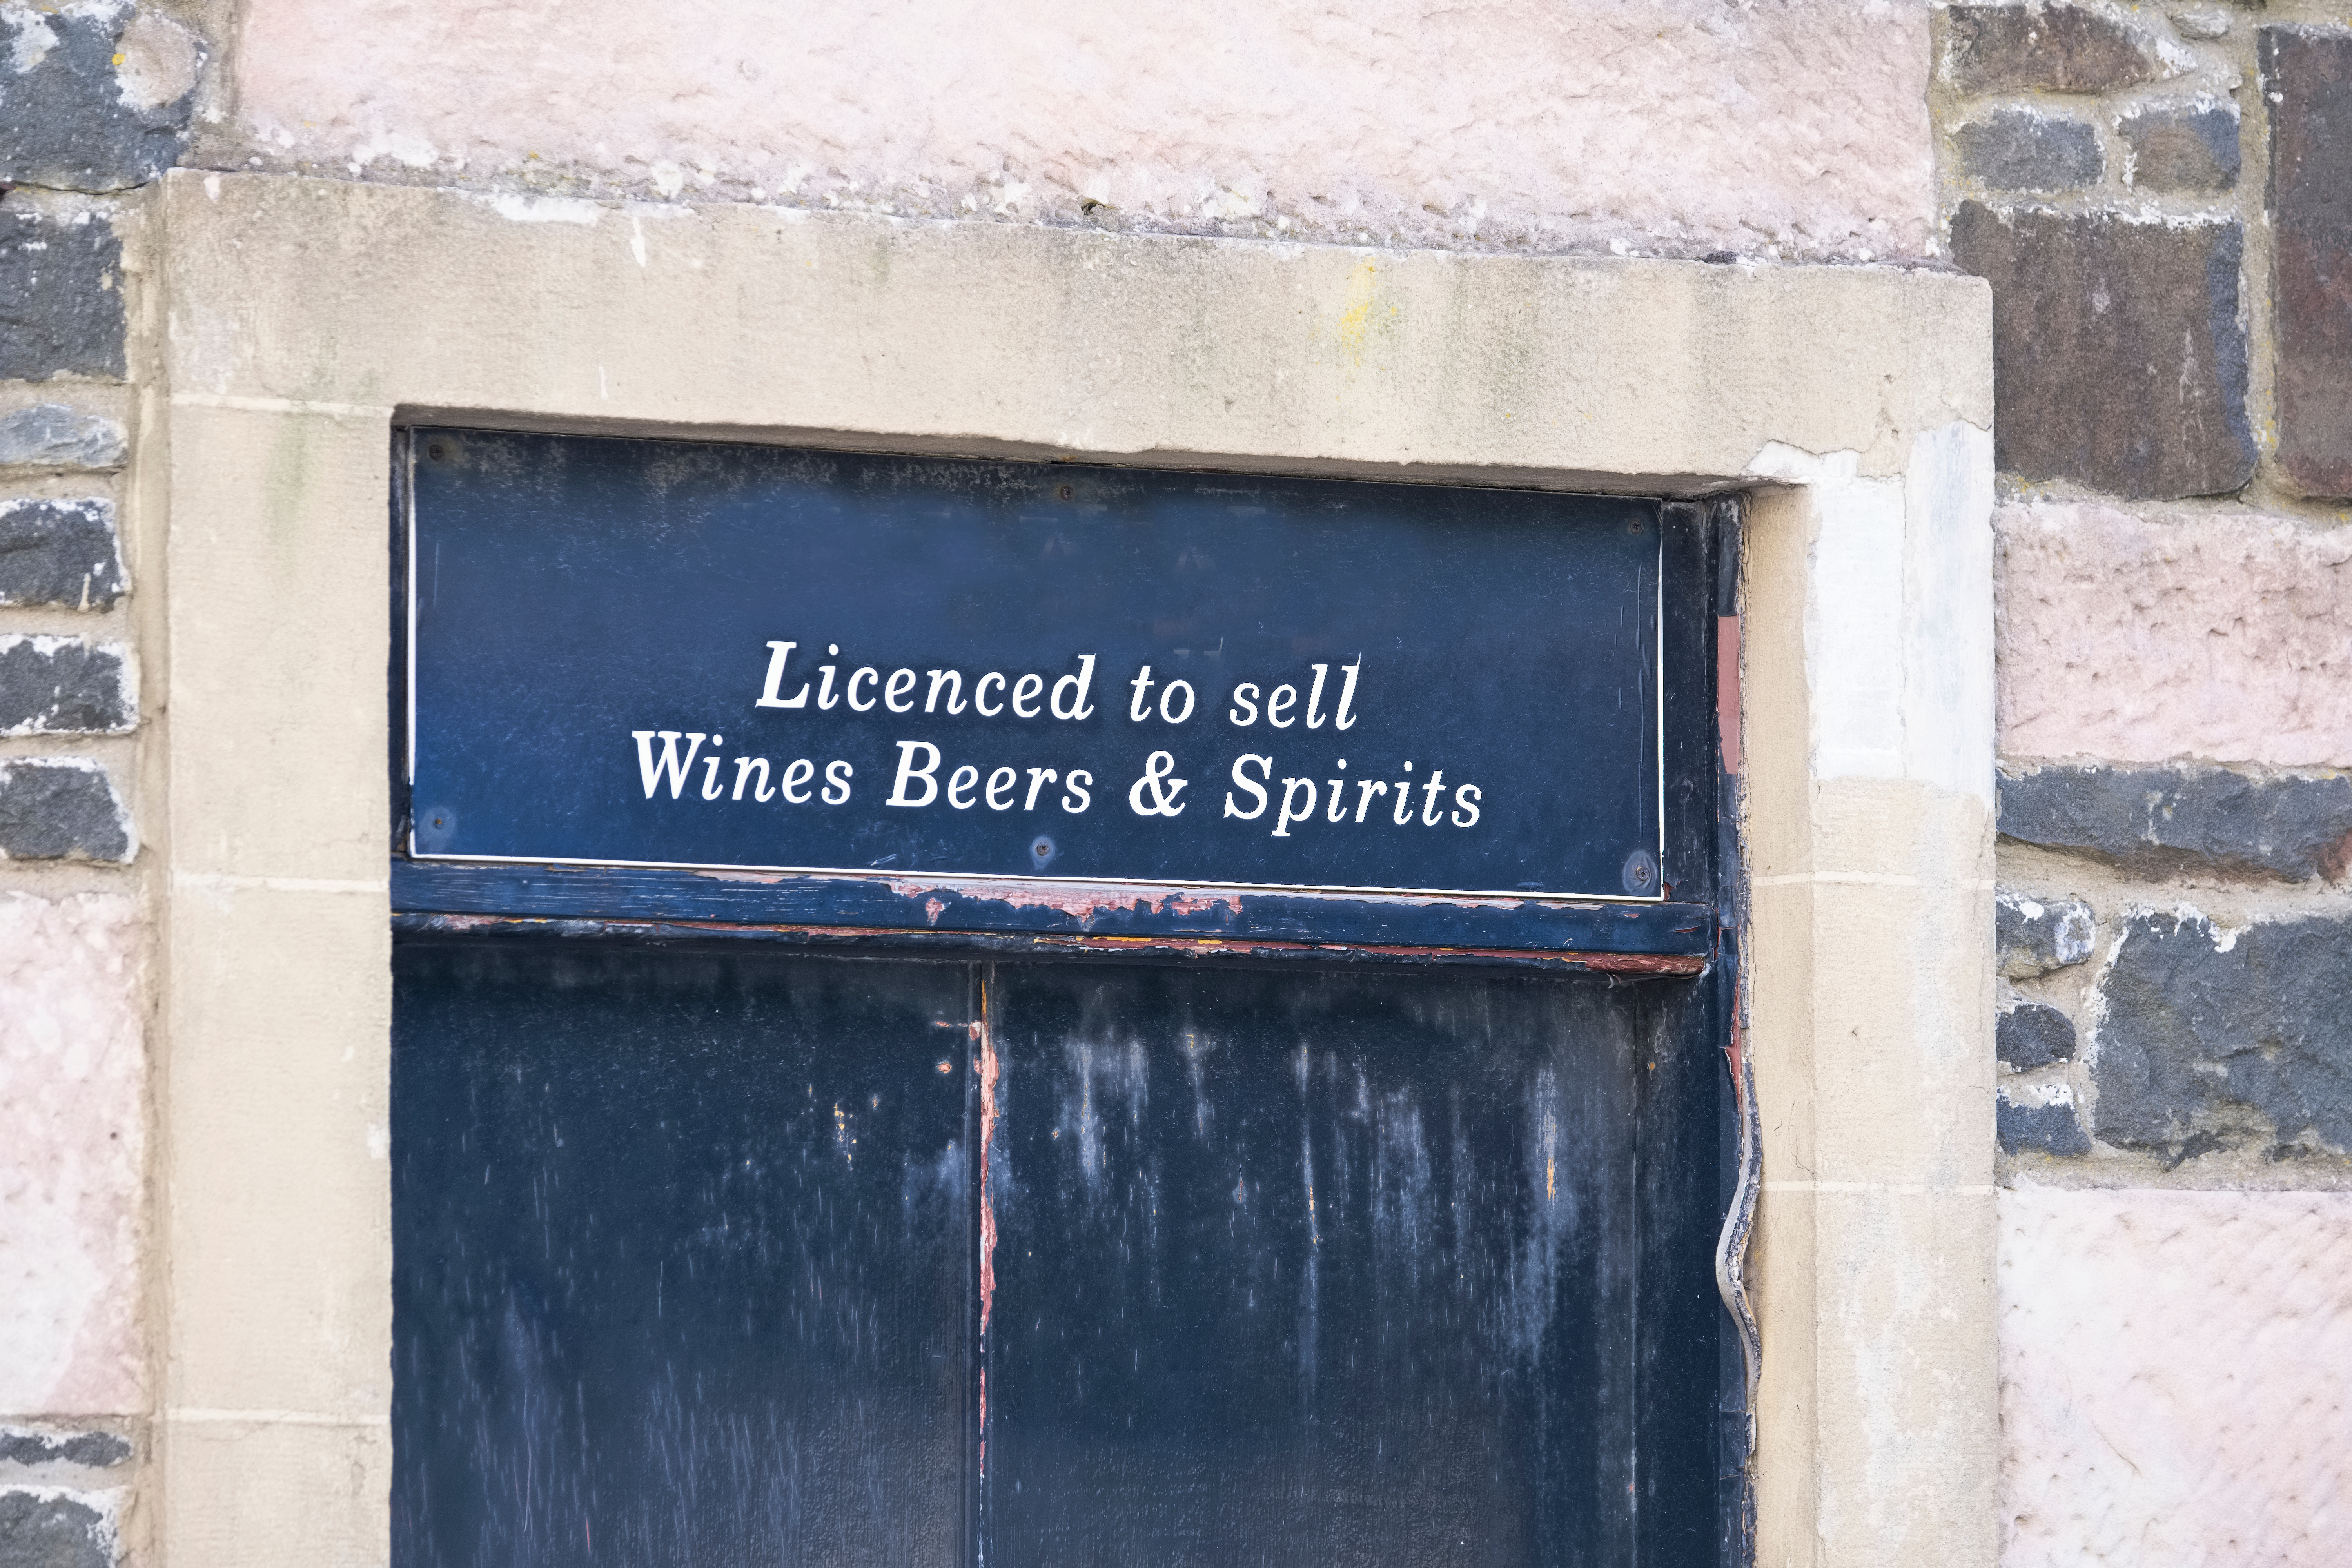 A door with a sign that says Licenced to sell Wine Beers & Spirits